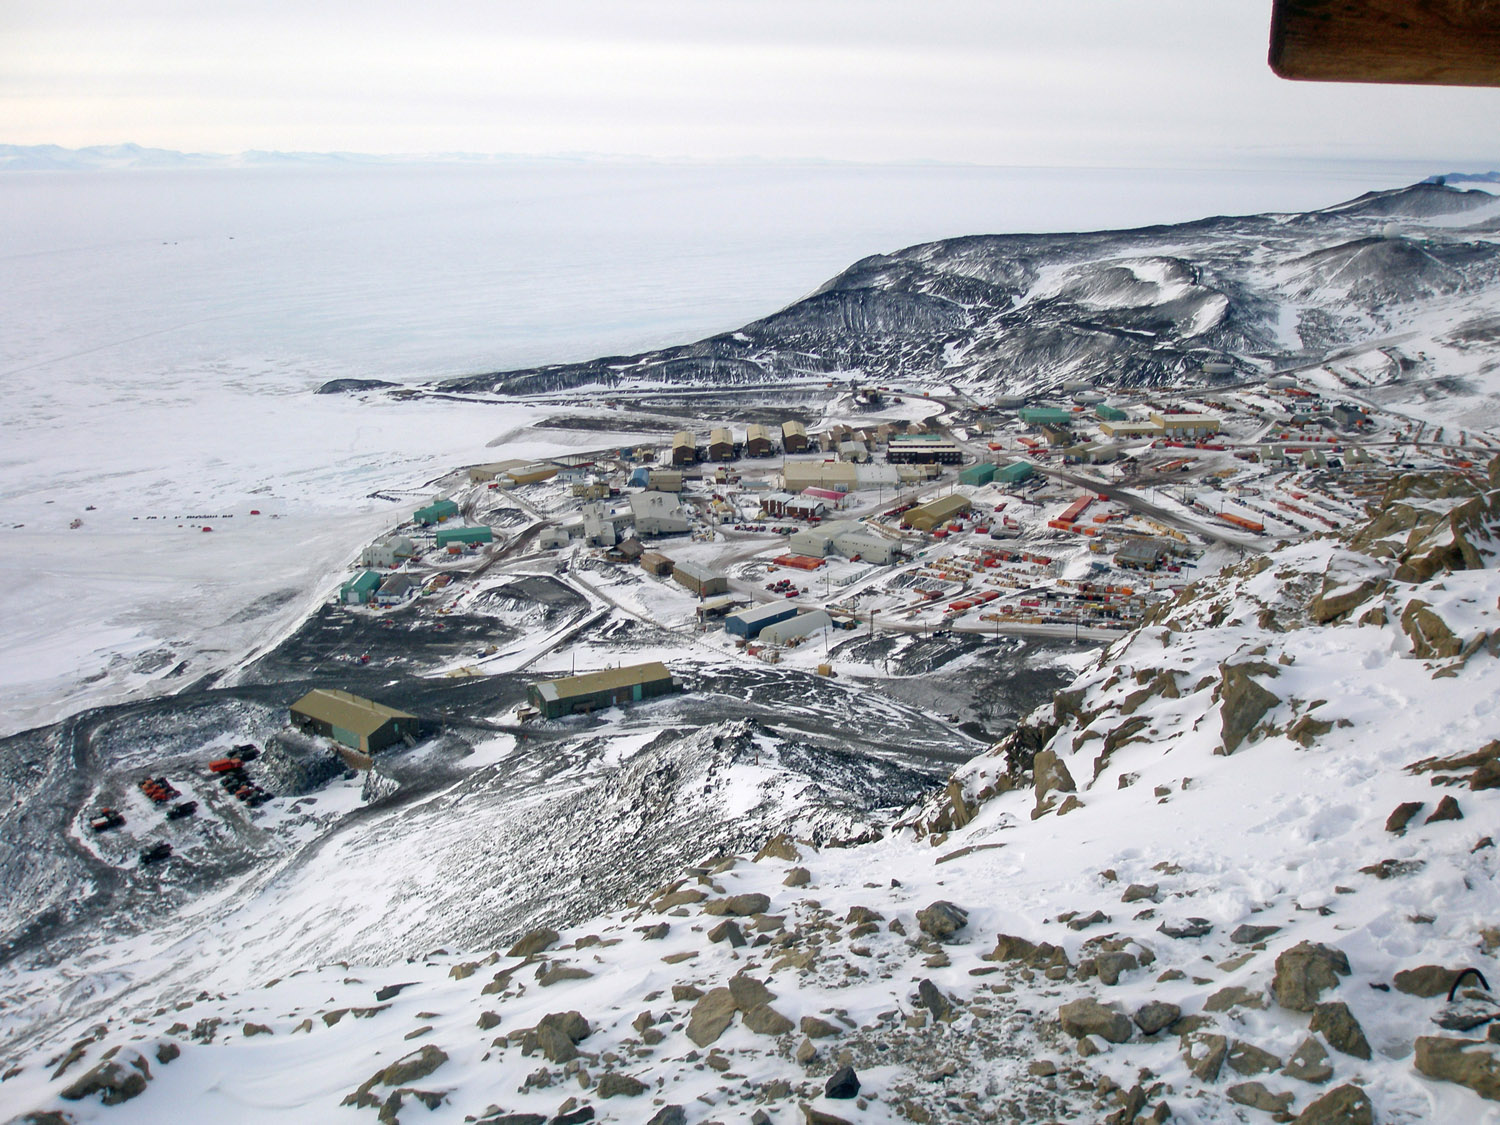 McMurdo Station, from the Summit of Observation Hill